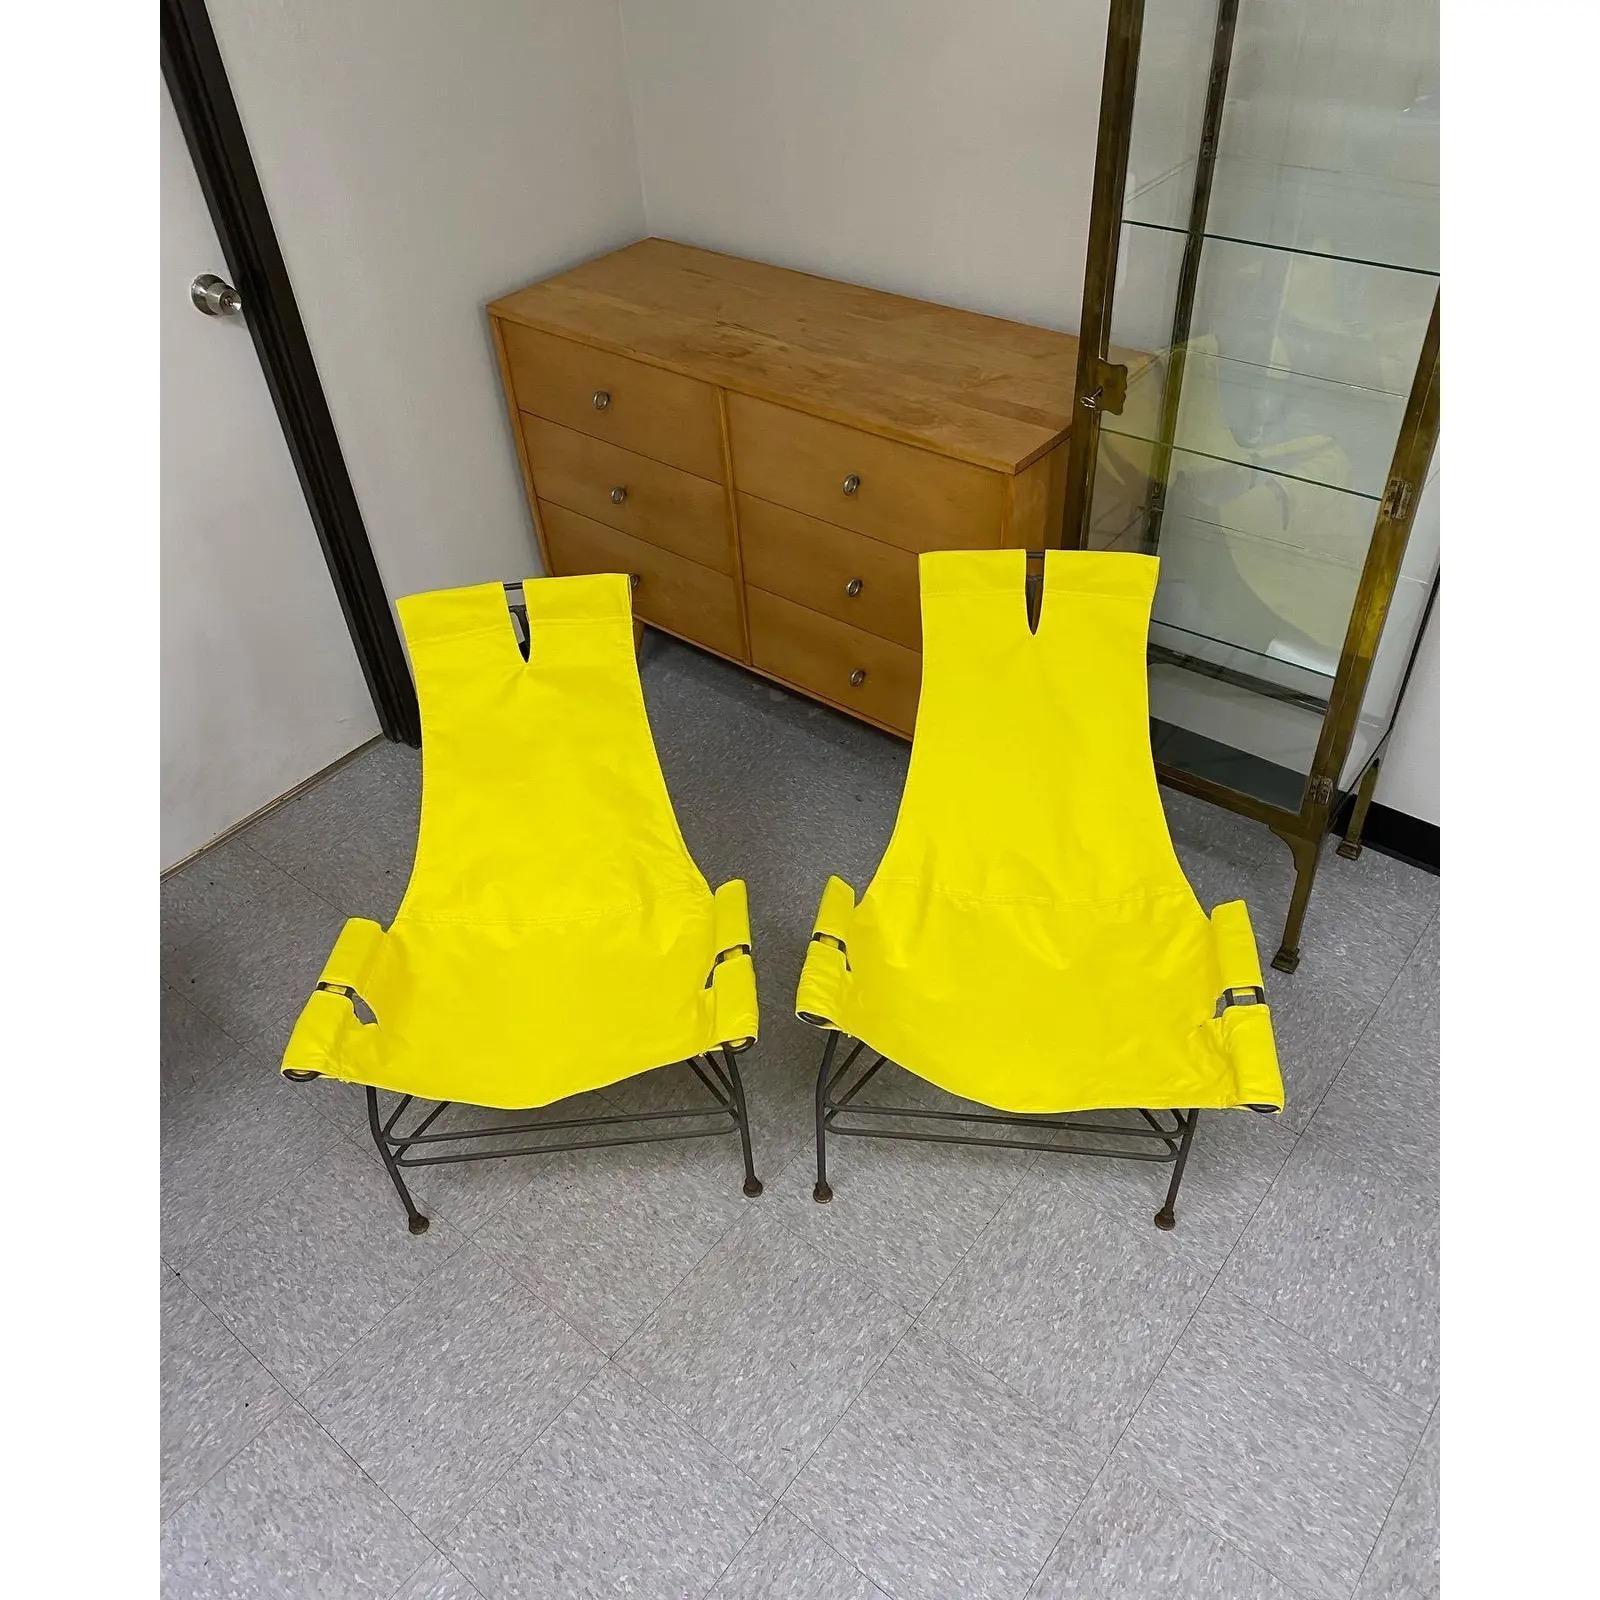 Midcentury Modern Jerry Johnson Iron Sling Chairs, a Pair In Good Condition For Sale In Fort Collins, CO